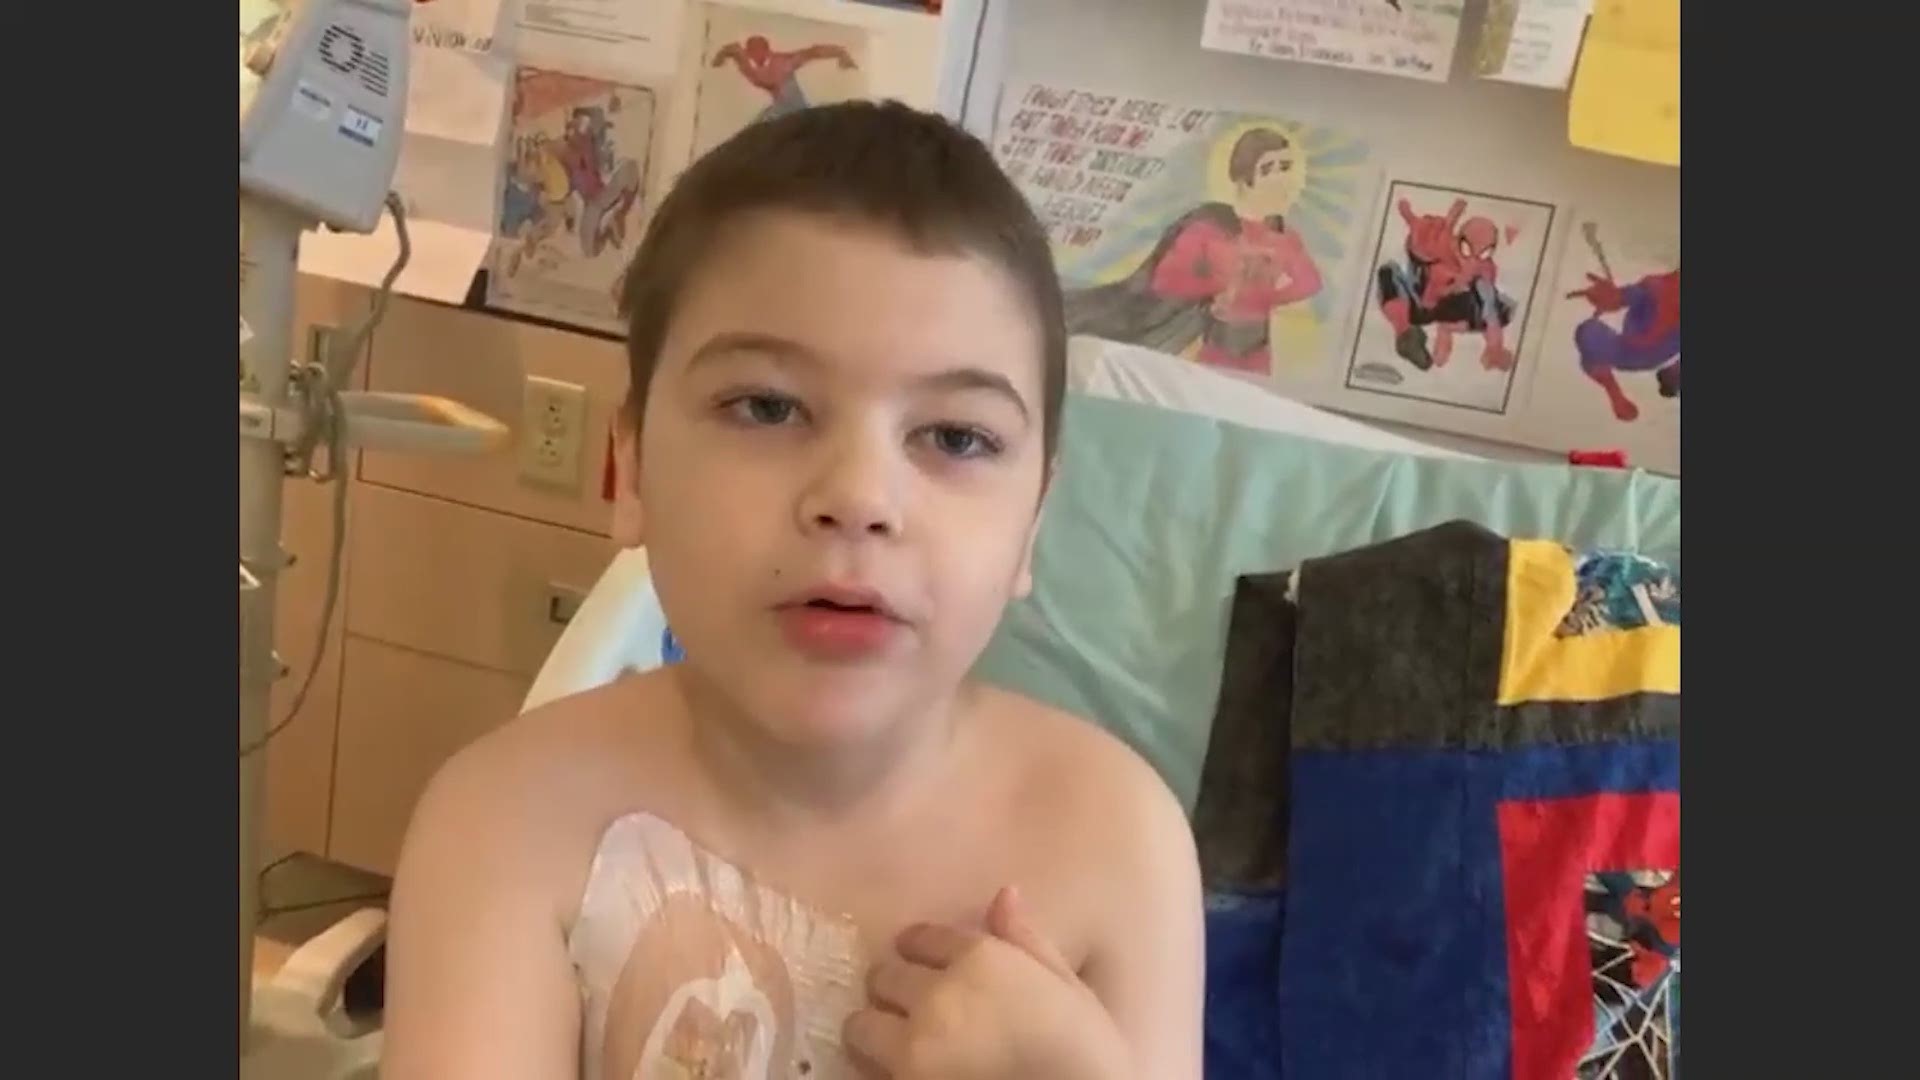 The superhero-loving boy was diagnosed with Doose Syndrome, a rare form of epilepsy, at age 3.